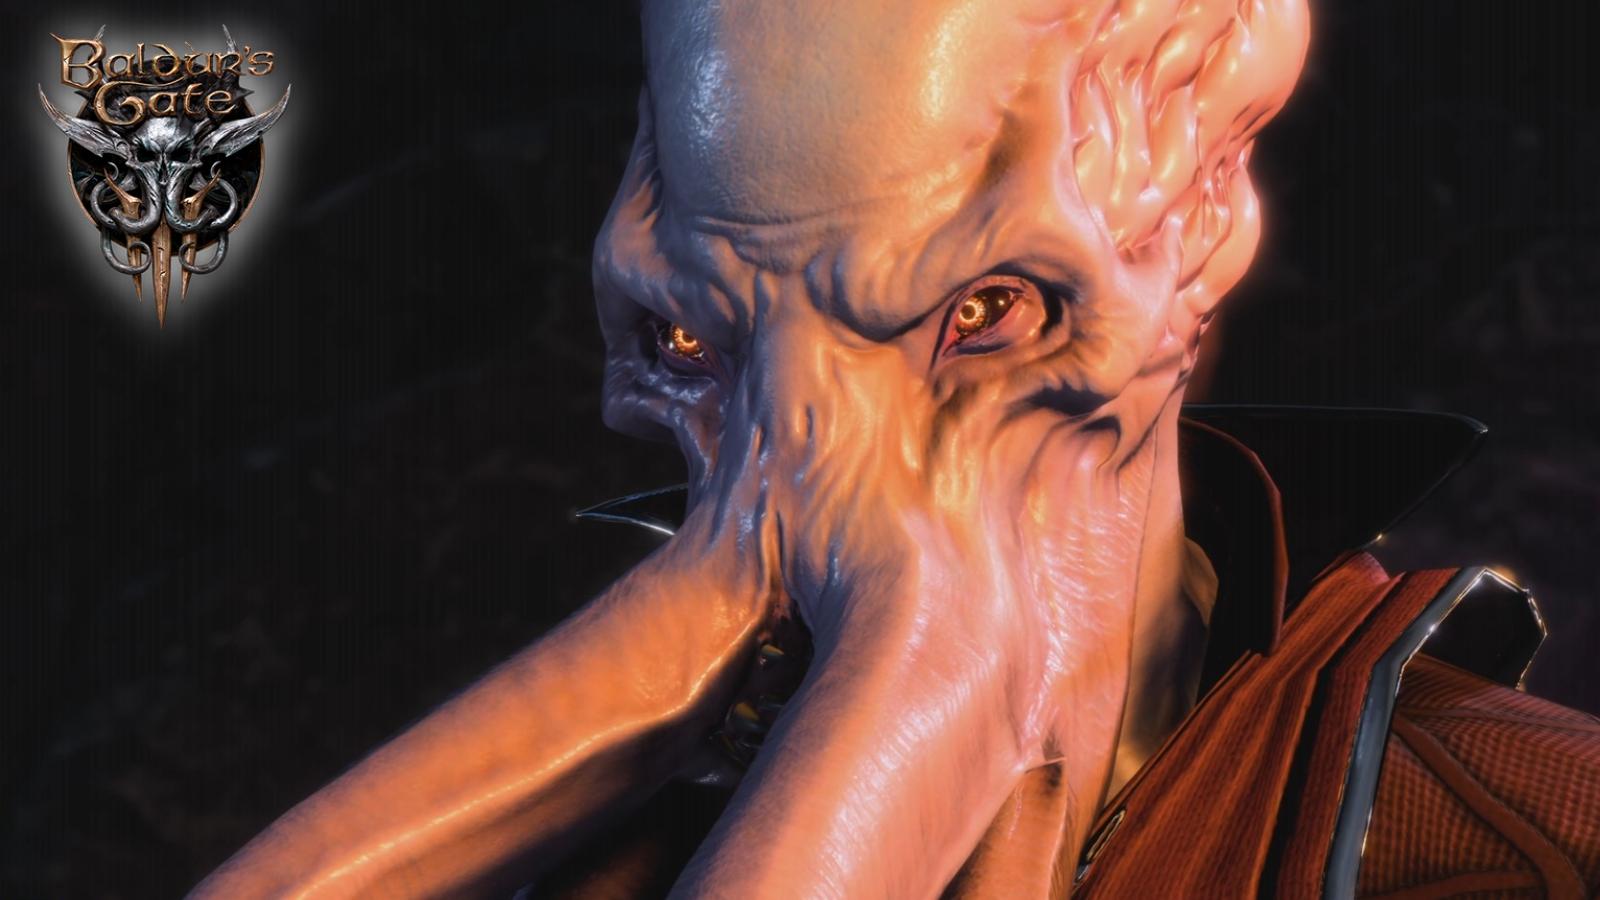 an image of a Mind Flayer in Baldur's Gate 3 with the game's logo on top left